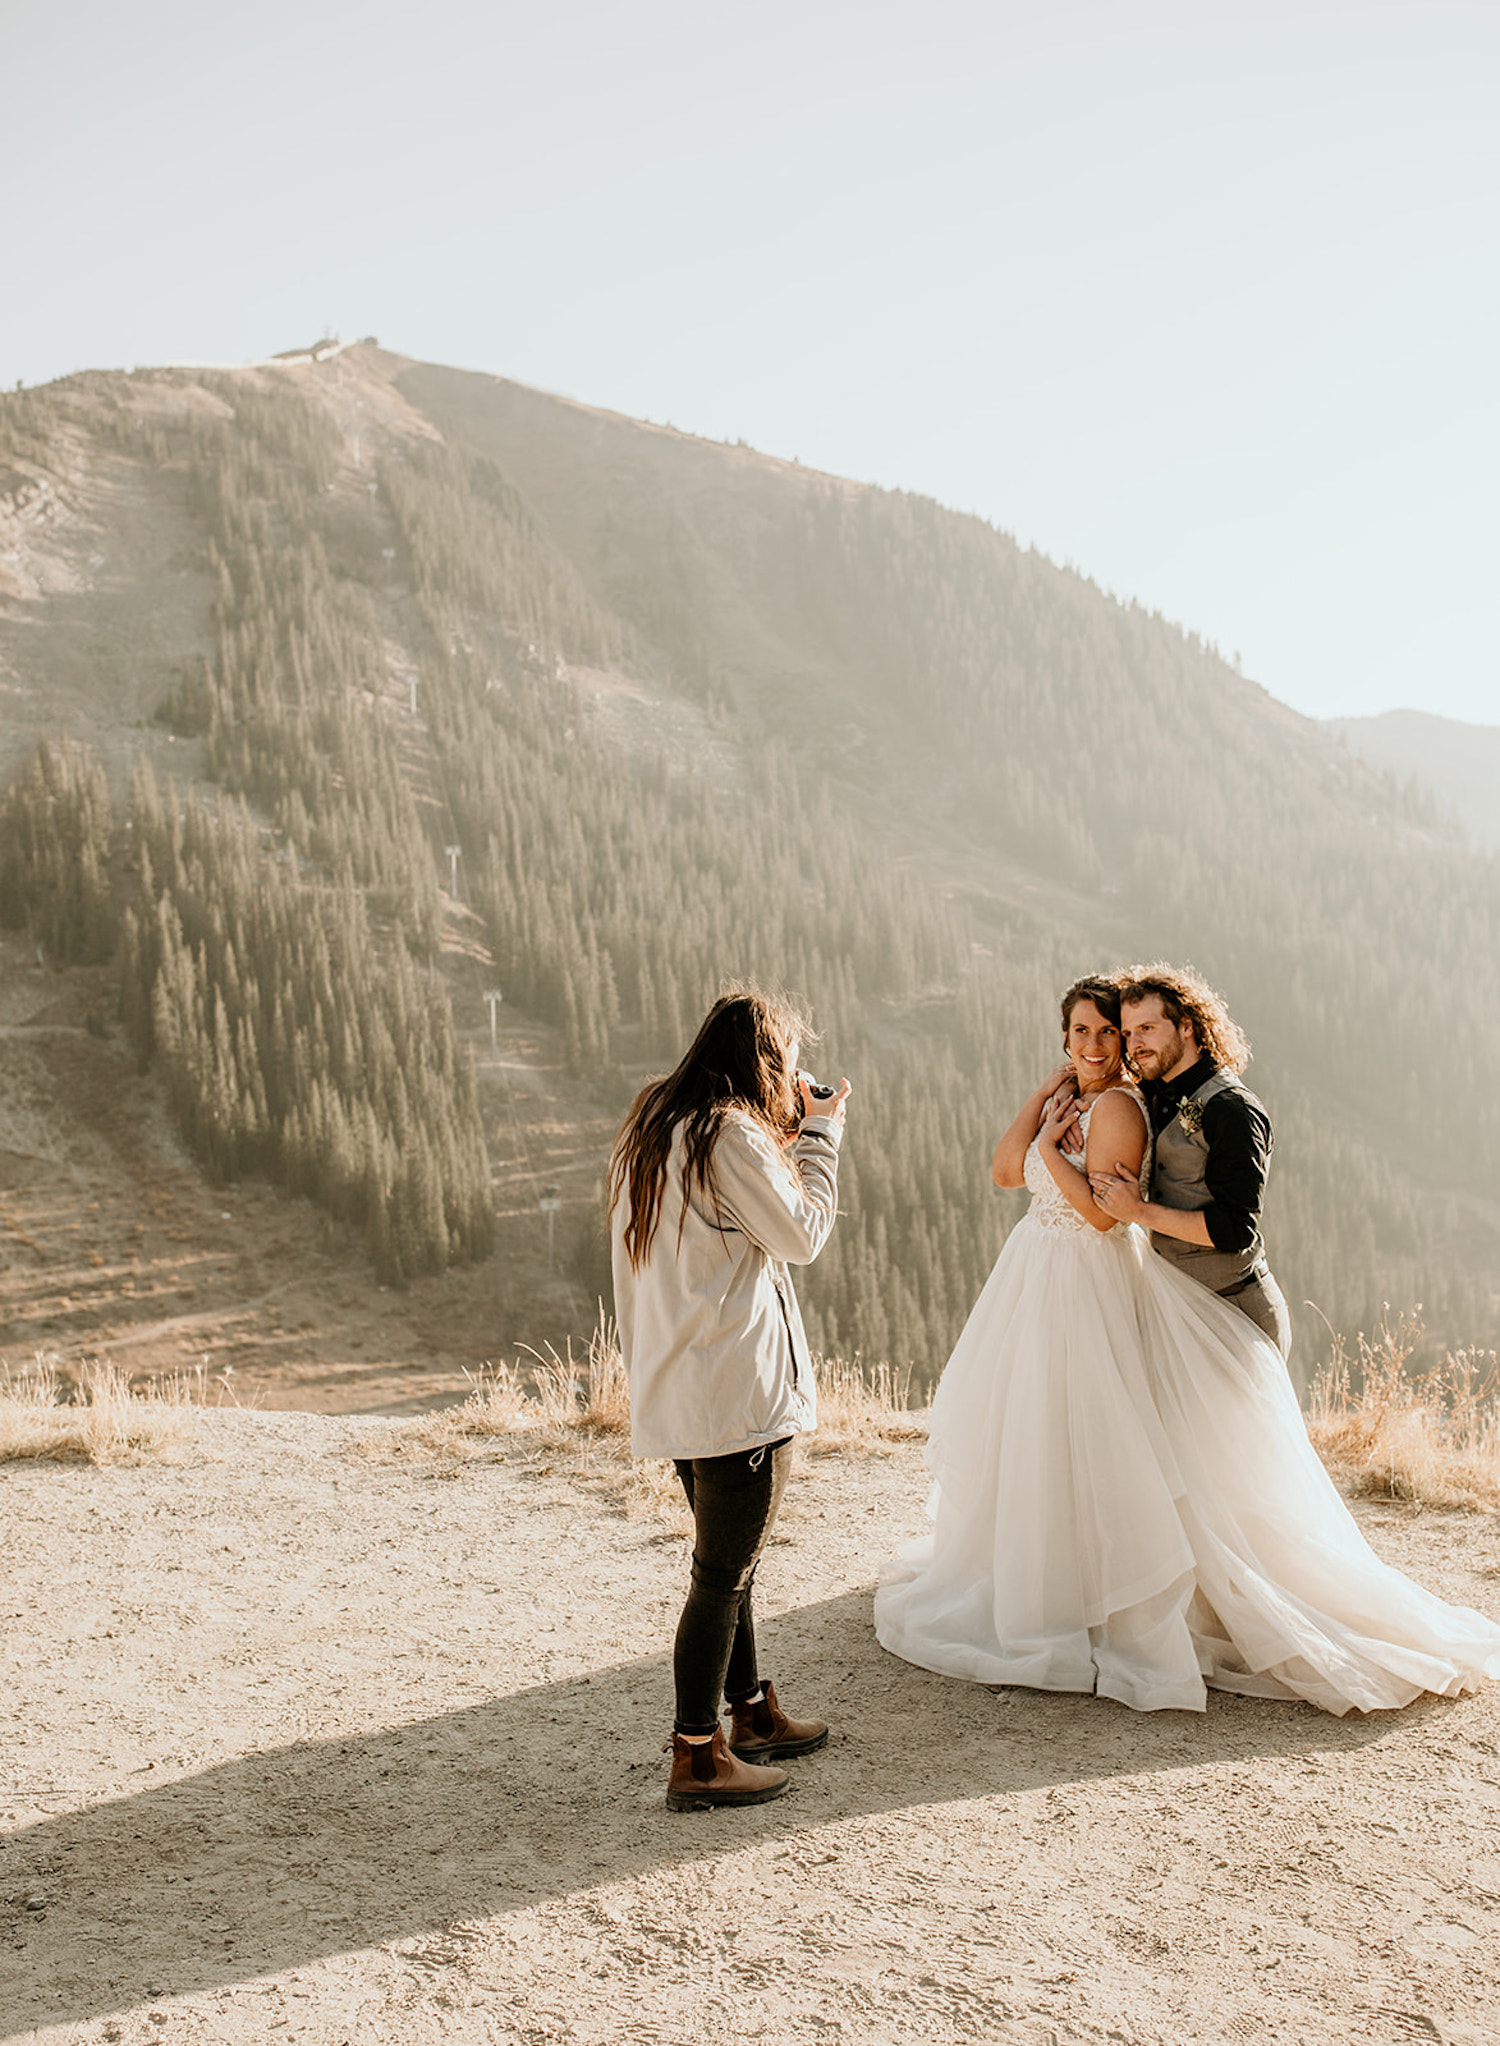 Wedding Photography Price Guide: Why Having One Is A Must! Oregon Wedding Photographer Morgan Wirth takes a photo of bride and groom for their photoshoot in the highlands